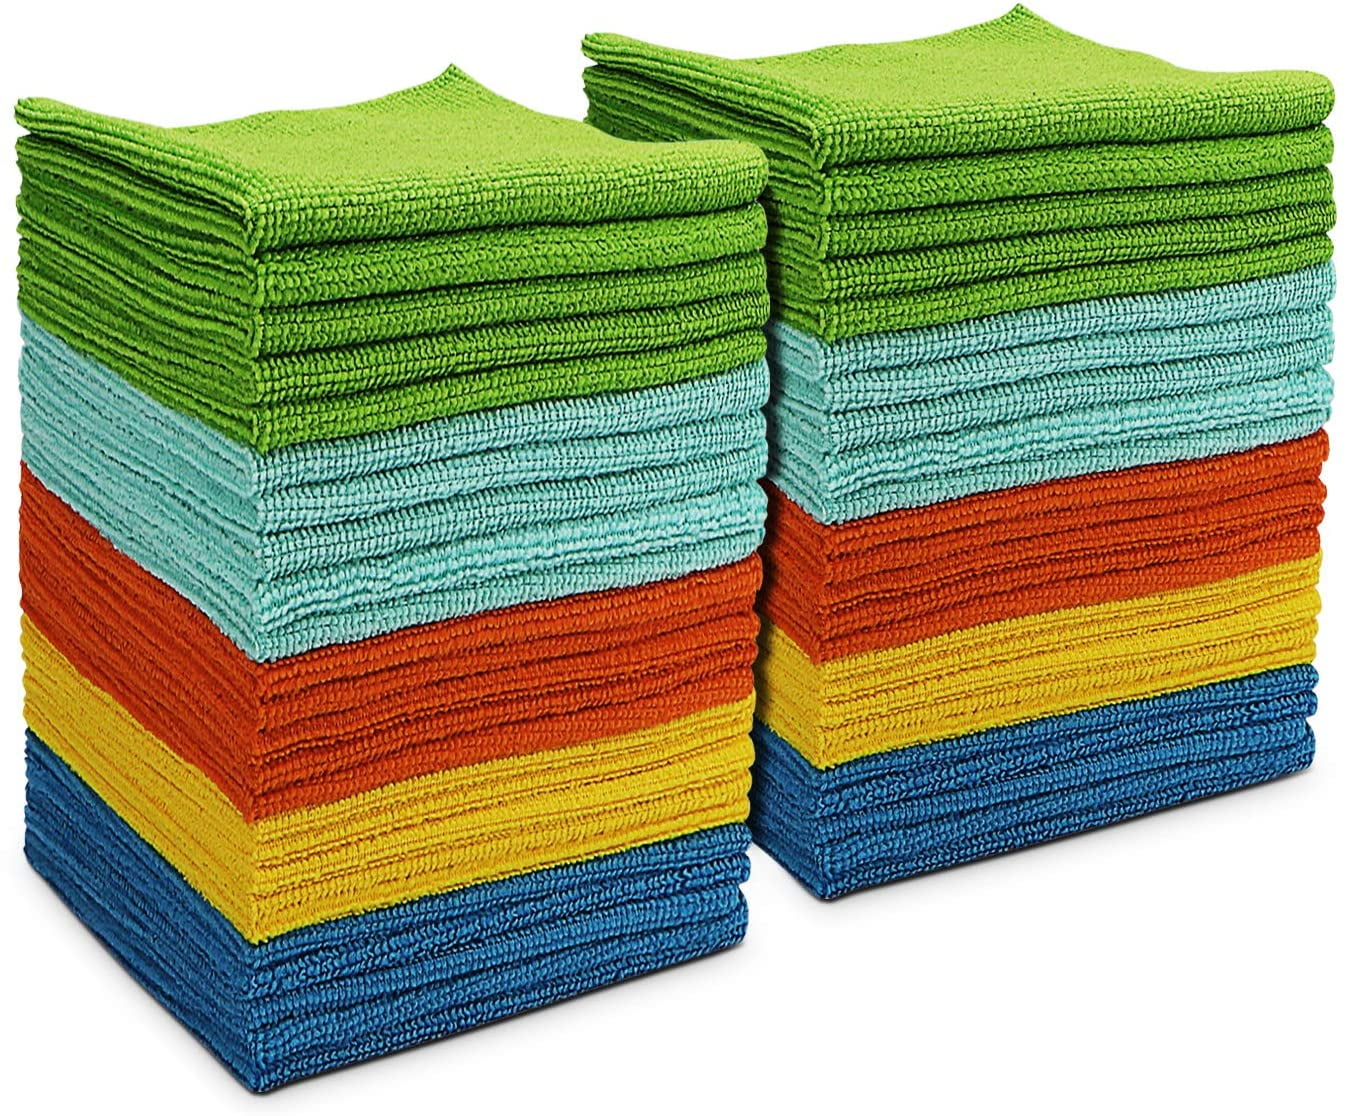 Microfiber Cleaning Clothes Reusable Softer Towels Absorbent Rags Lint Free S...